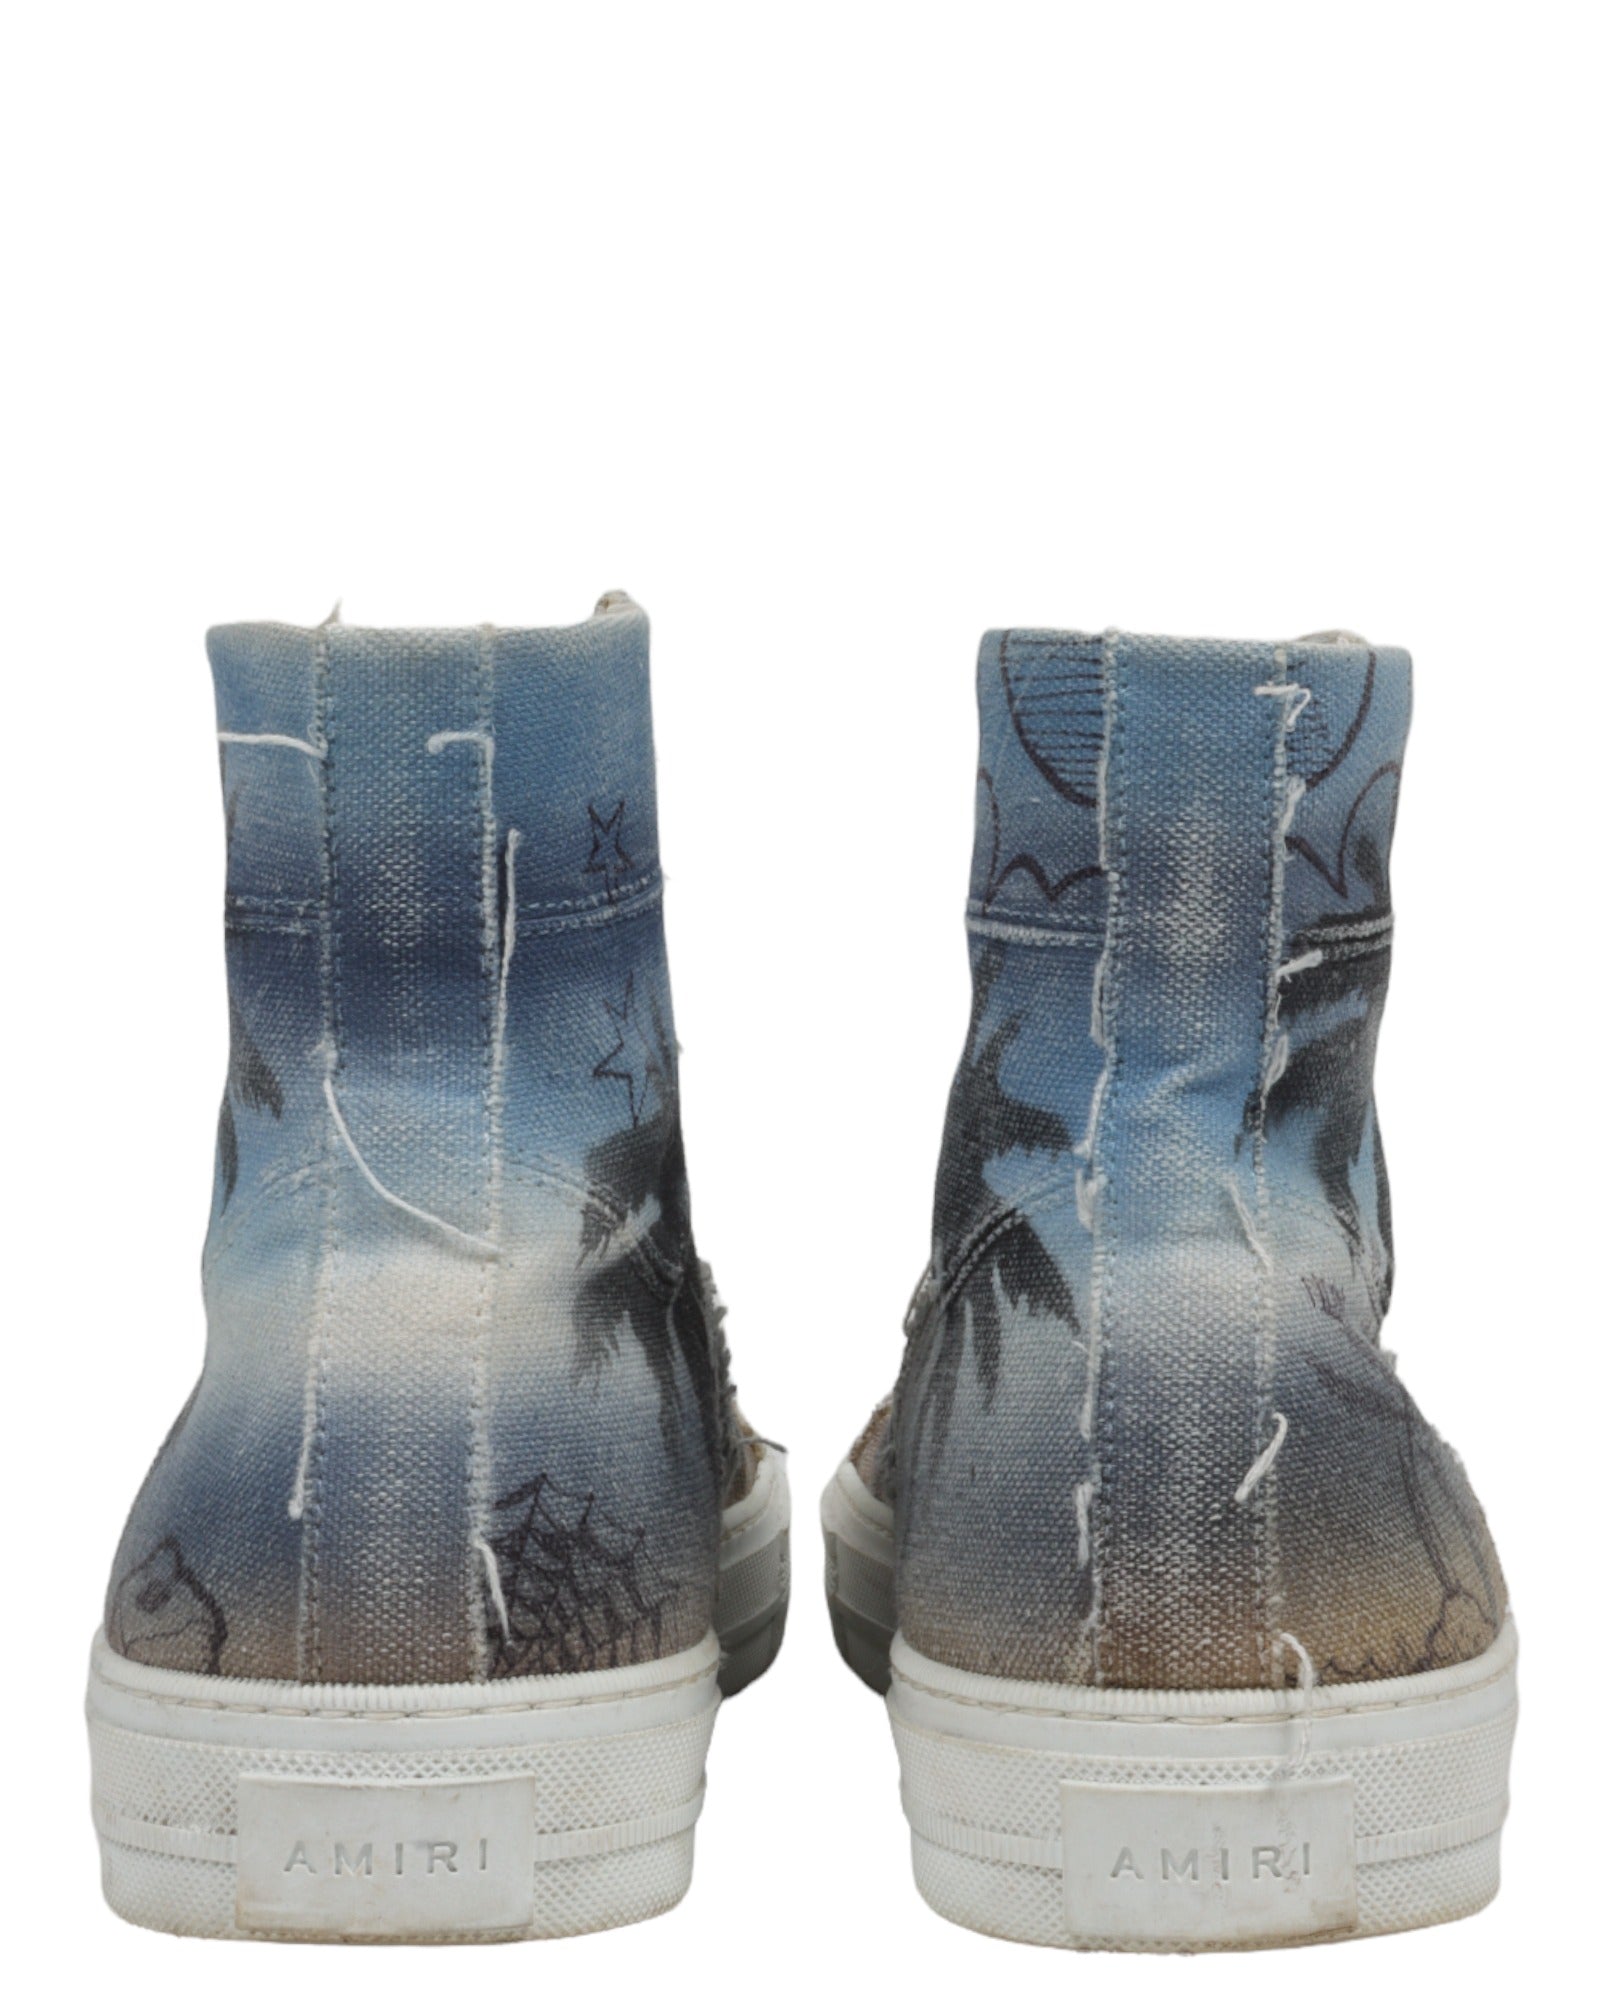 Canvas Palm Tree Sunset Sneakers